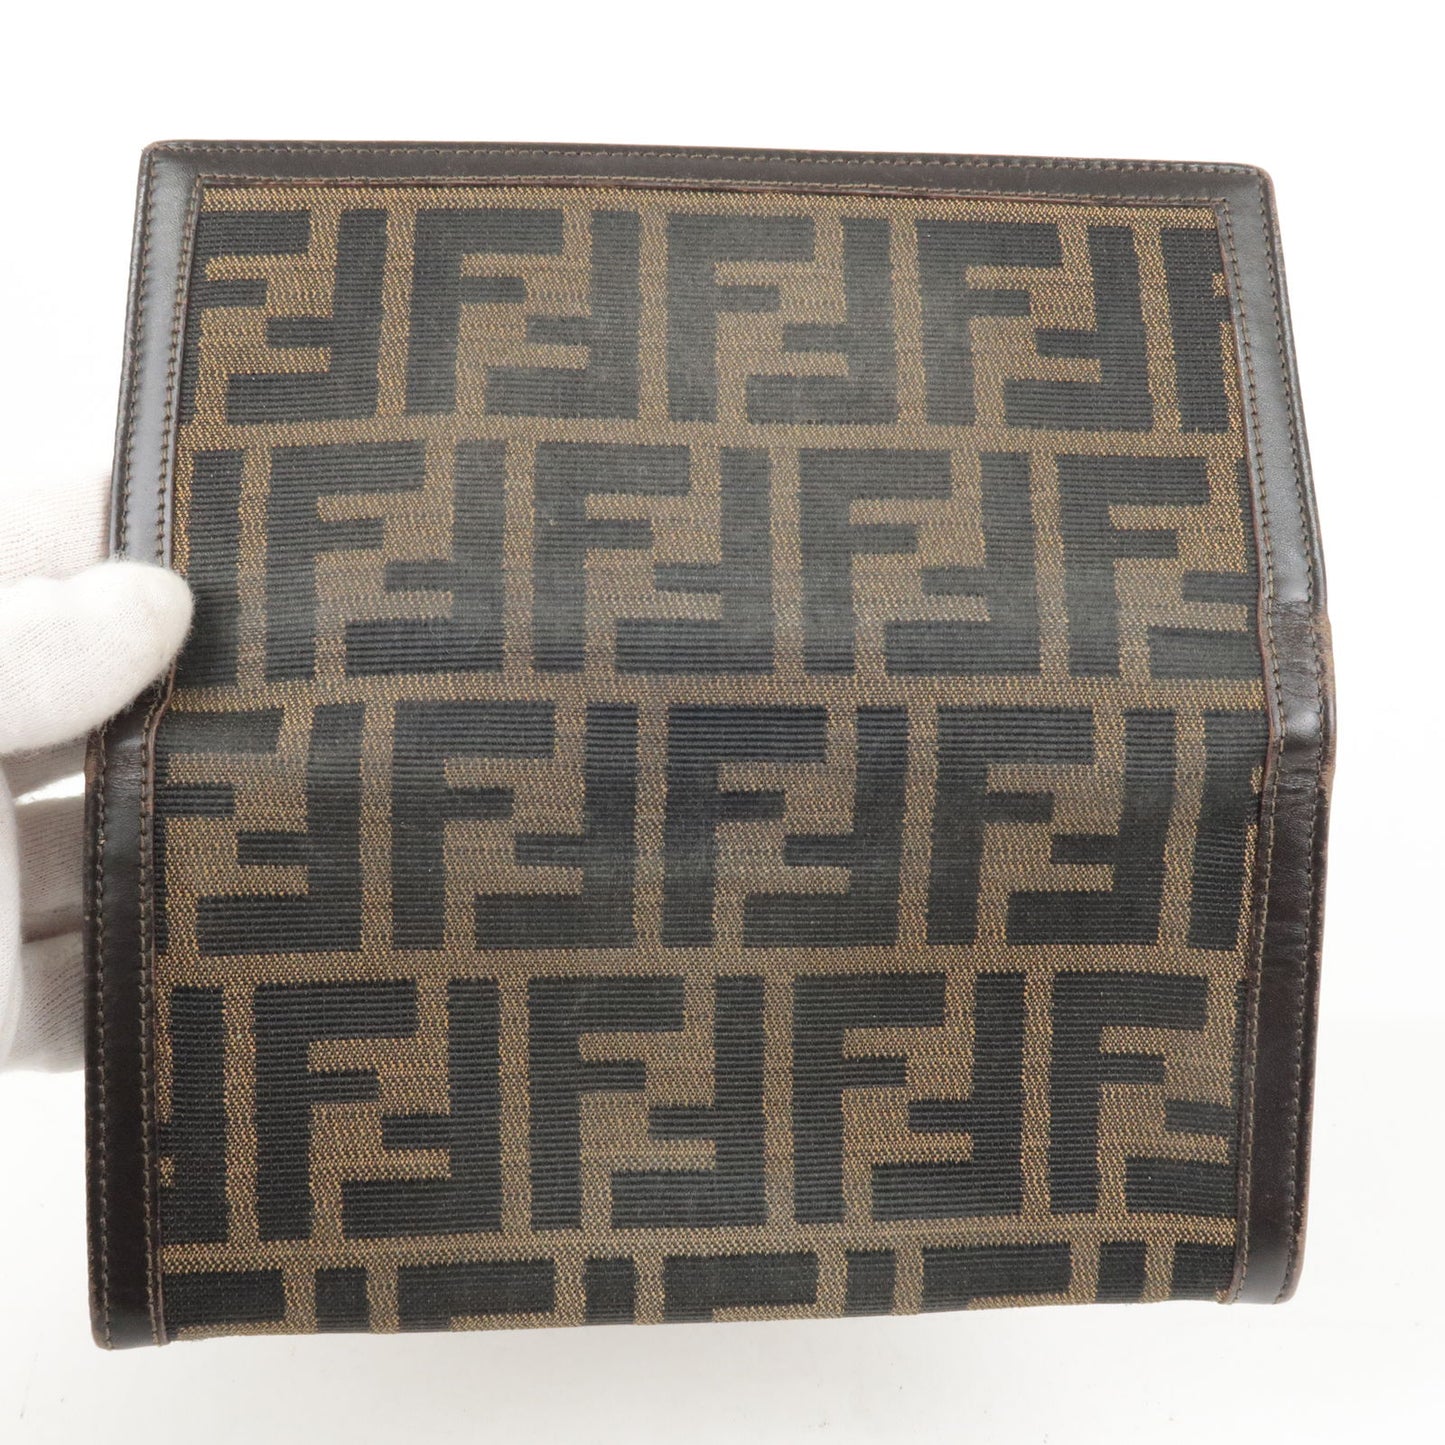 FENDI Zucca Print Canvas Leather Long Wallet Brown 30851